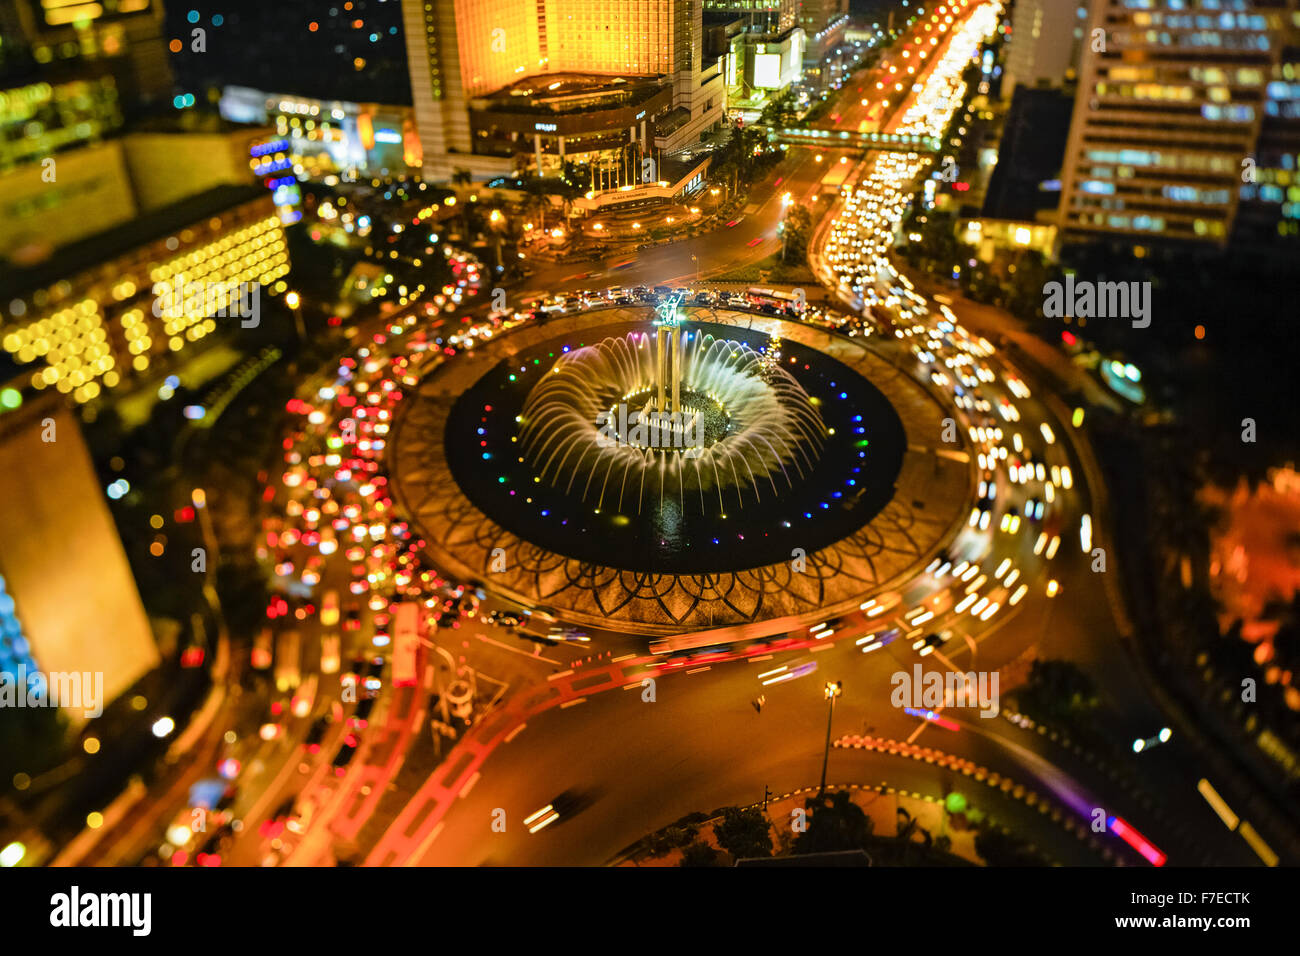 Indonesia, Jakarta, Hotel Indonesia roundabout, Welcome Monument and buildings along Jalan Thamrin at night Stock Photo